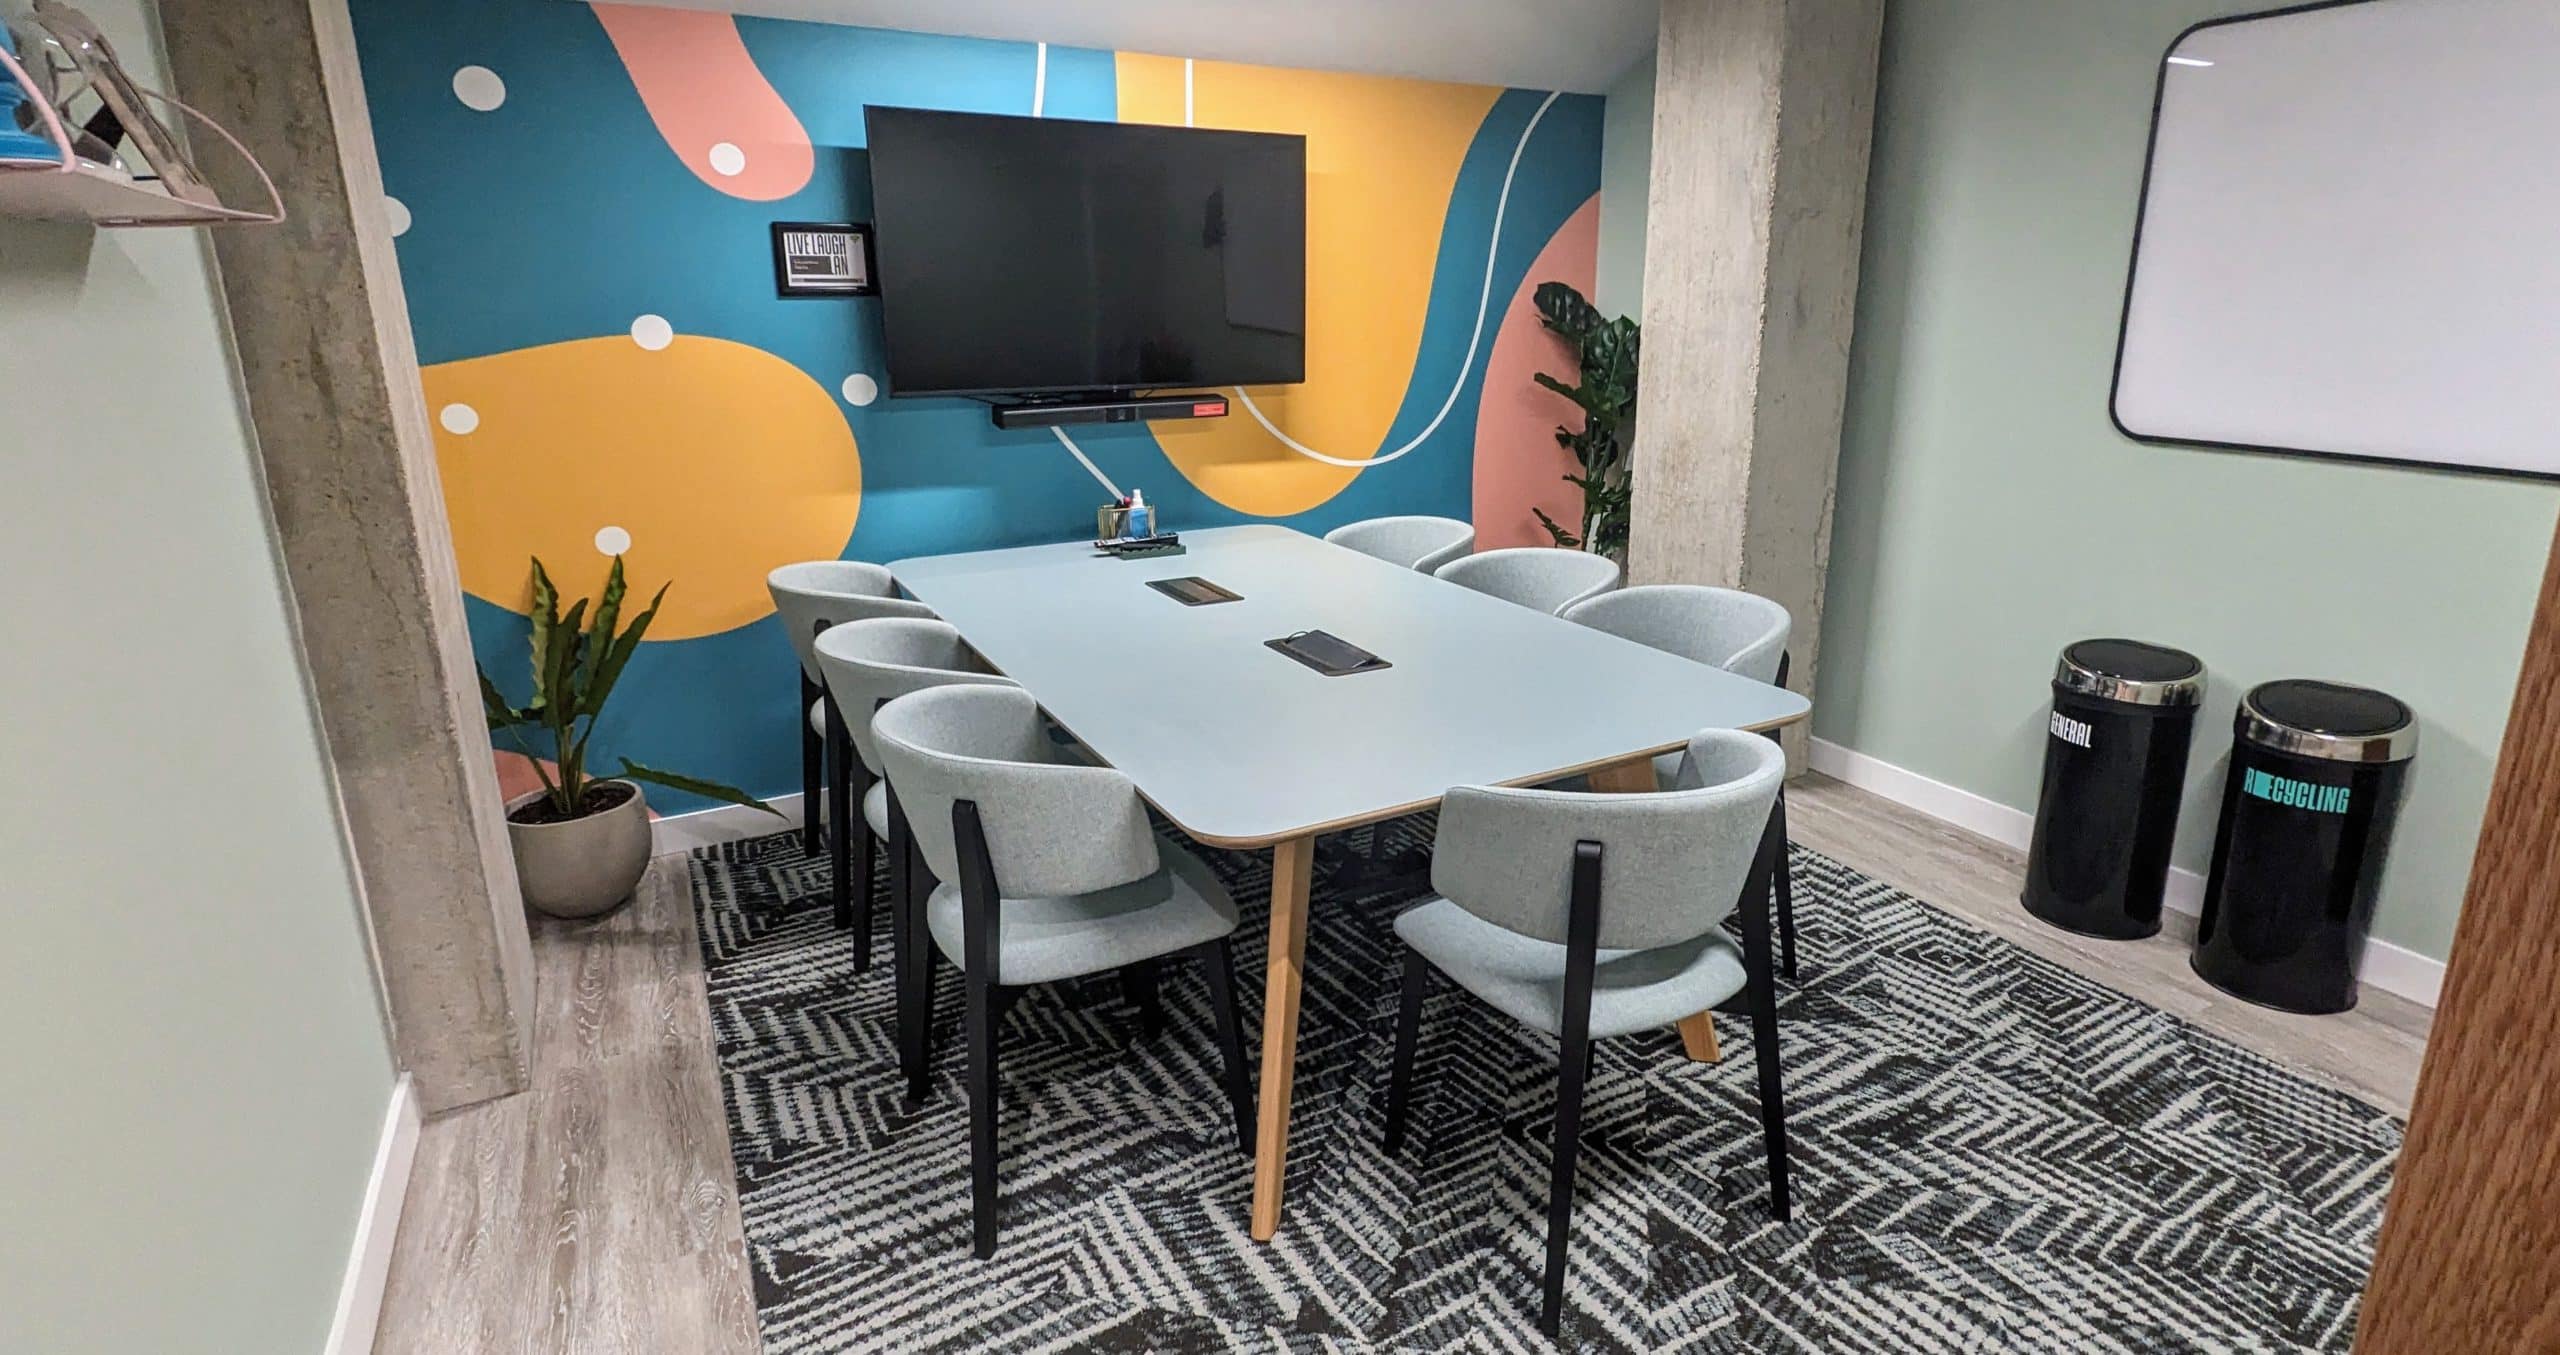 Image of a meeting room with brightly coloured walls